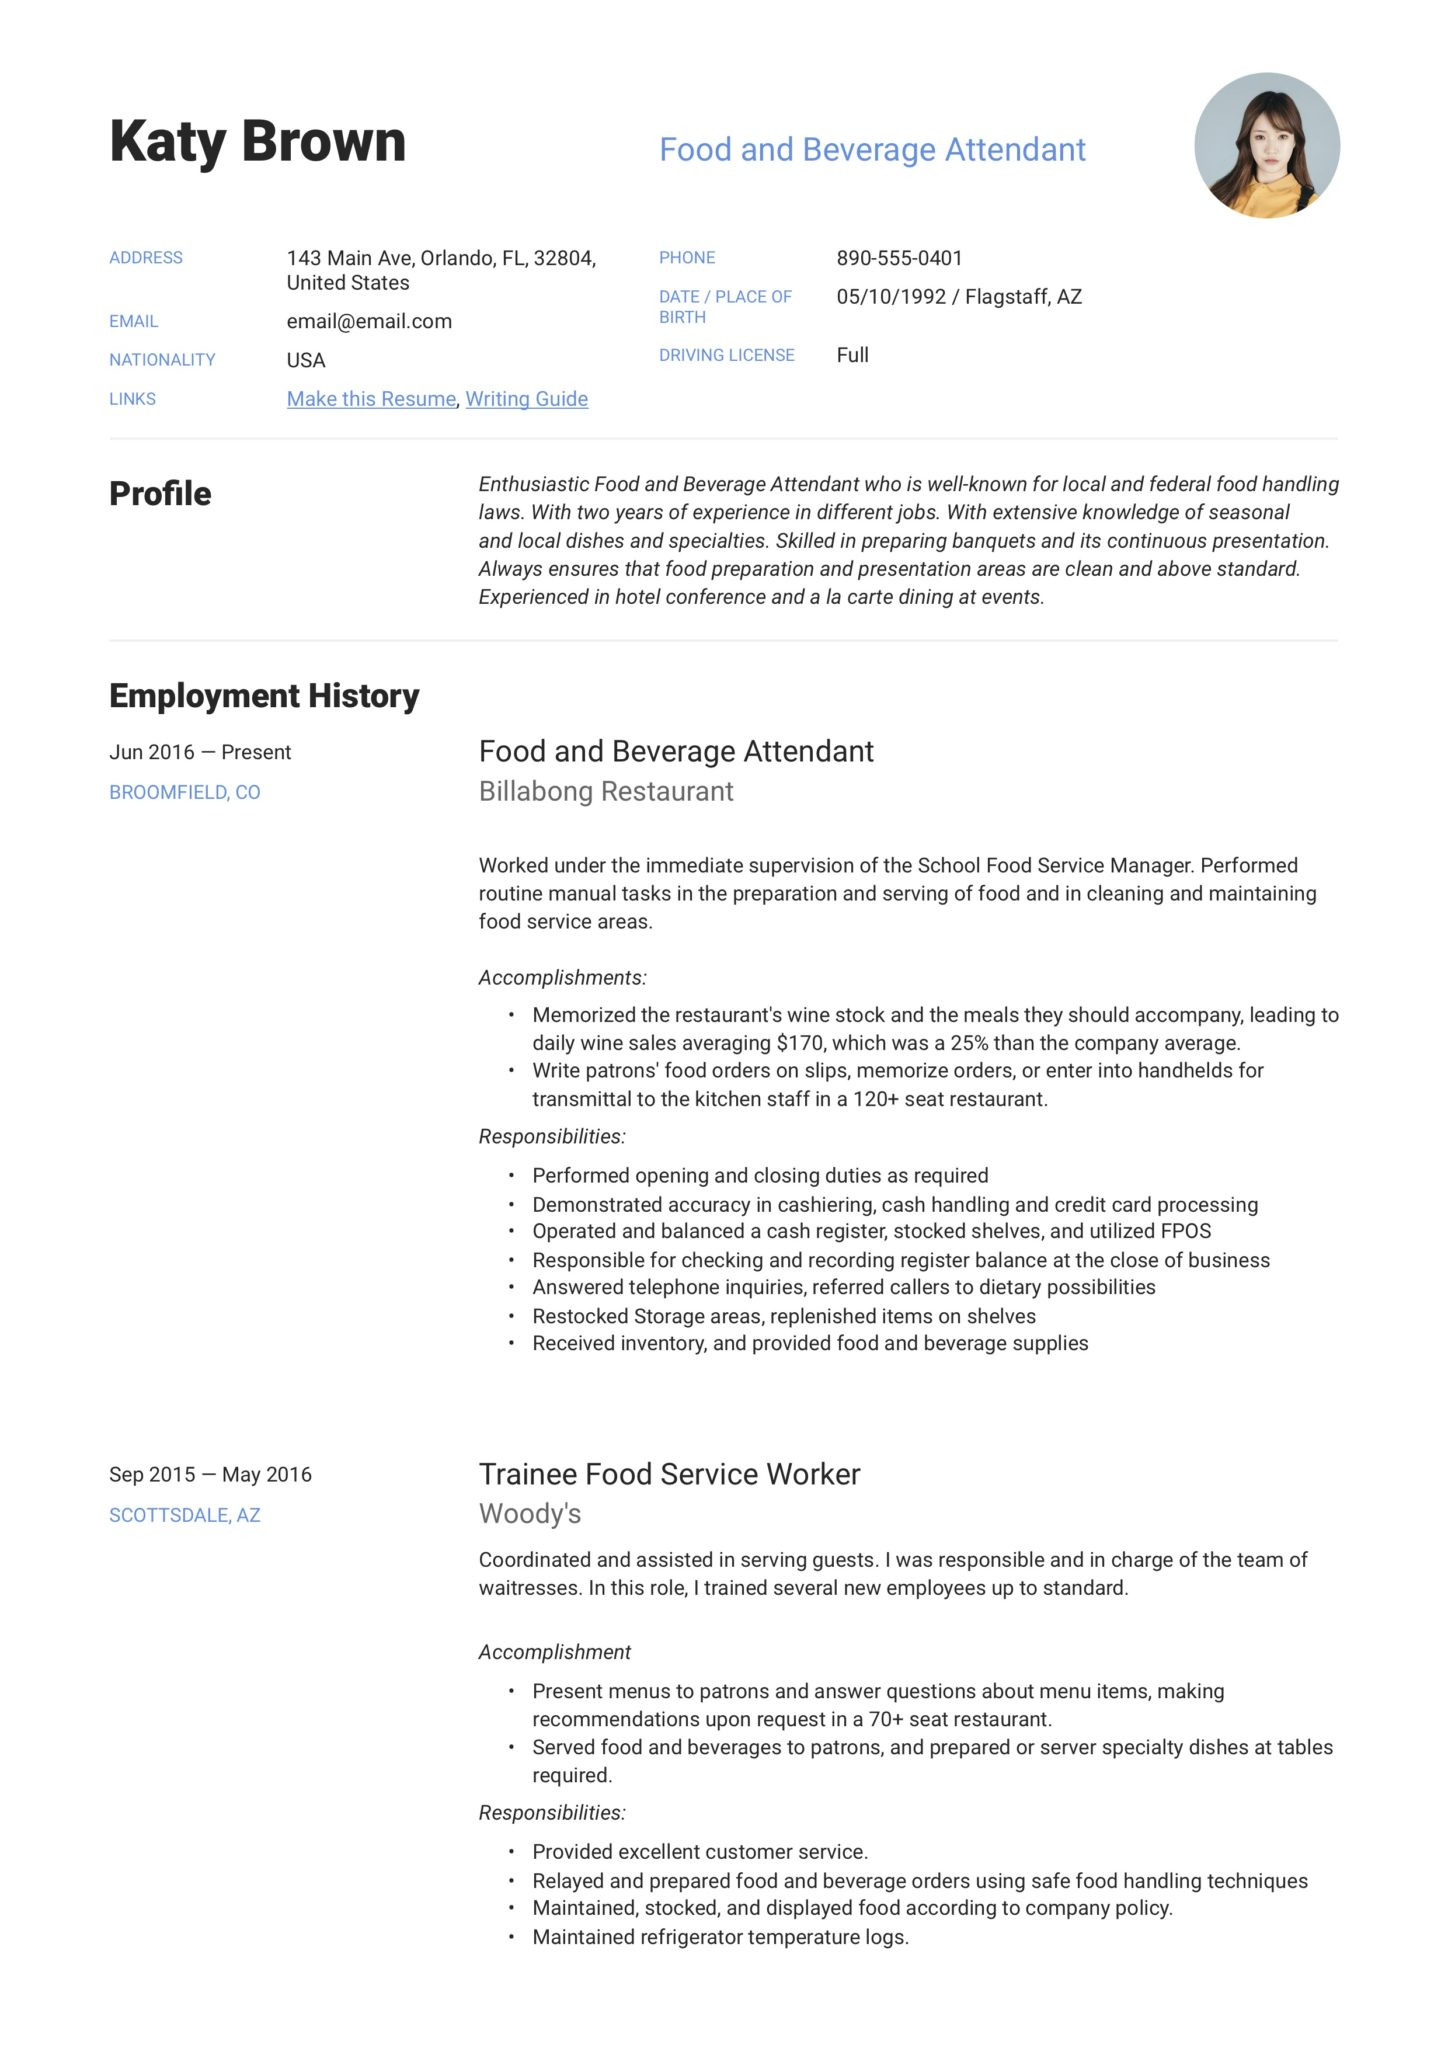 Sample Objectives In Resume for Fast Food Crew 22 Food & Beverage attendant Resumes Pdf & Word 2022